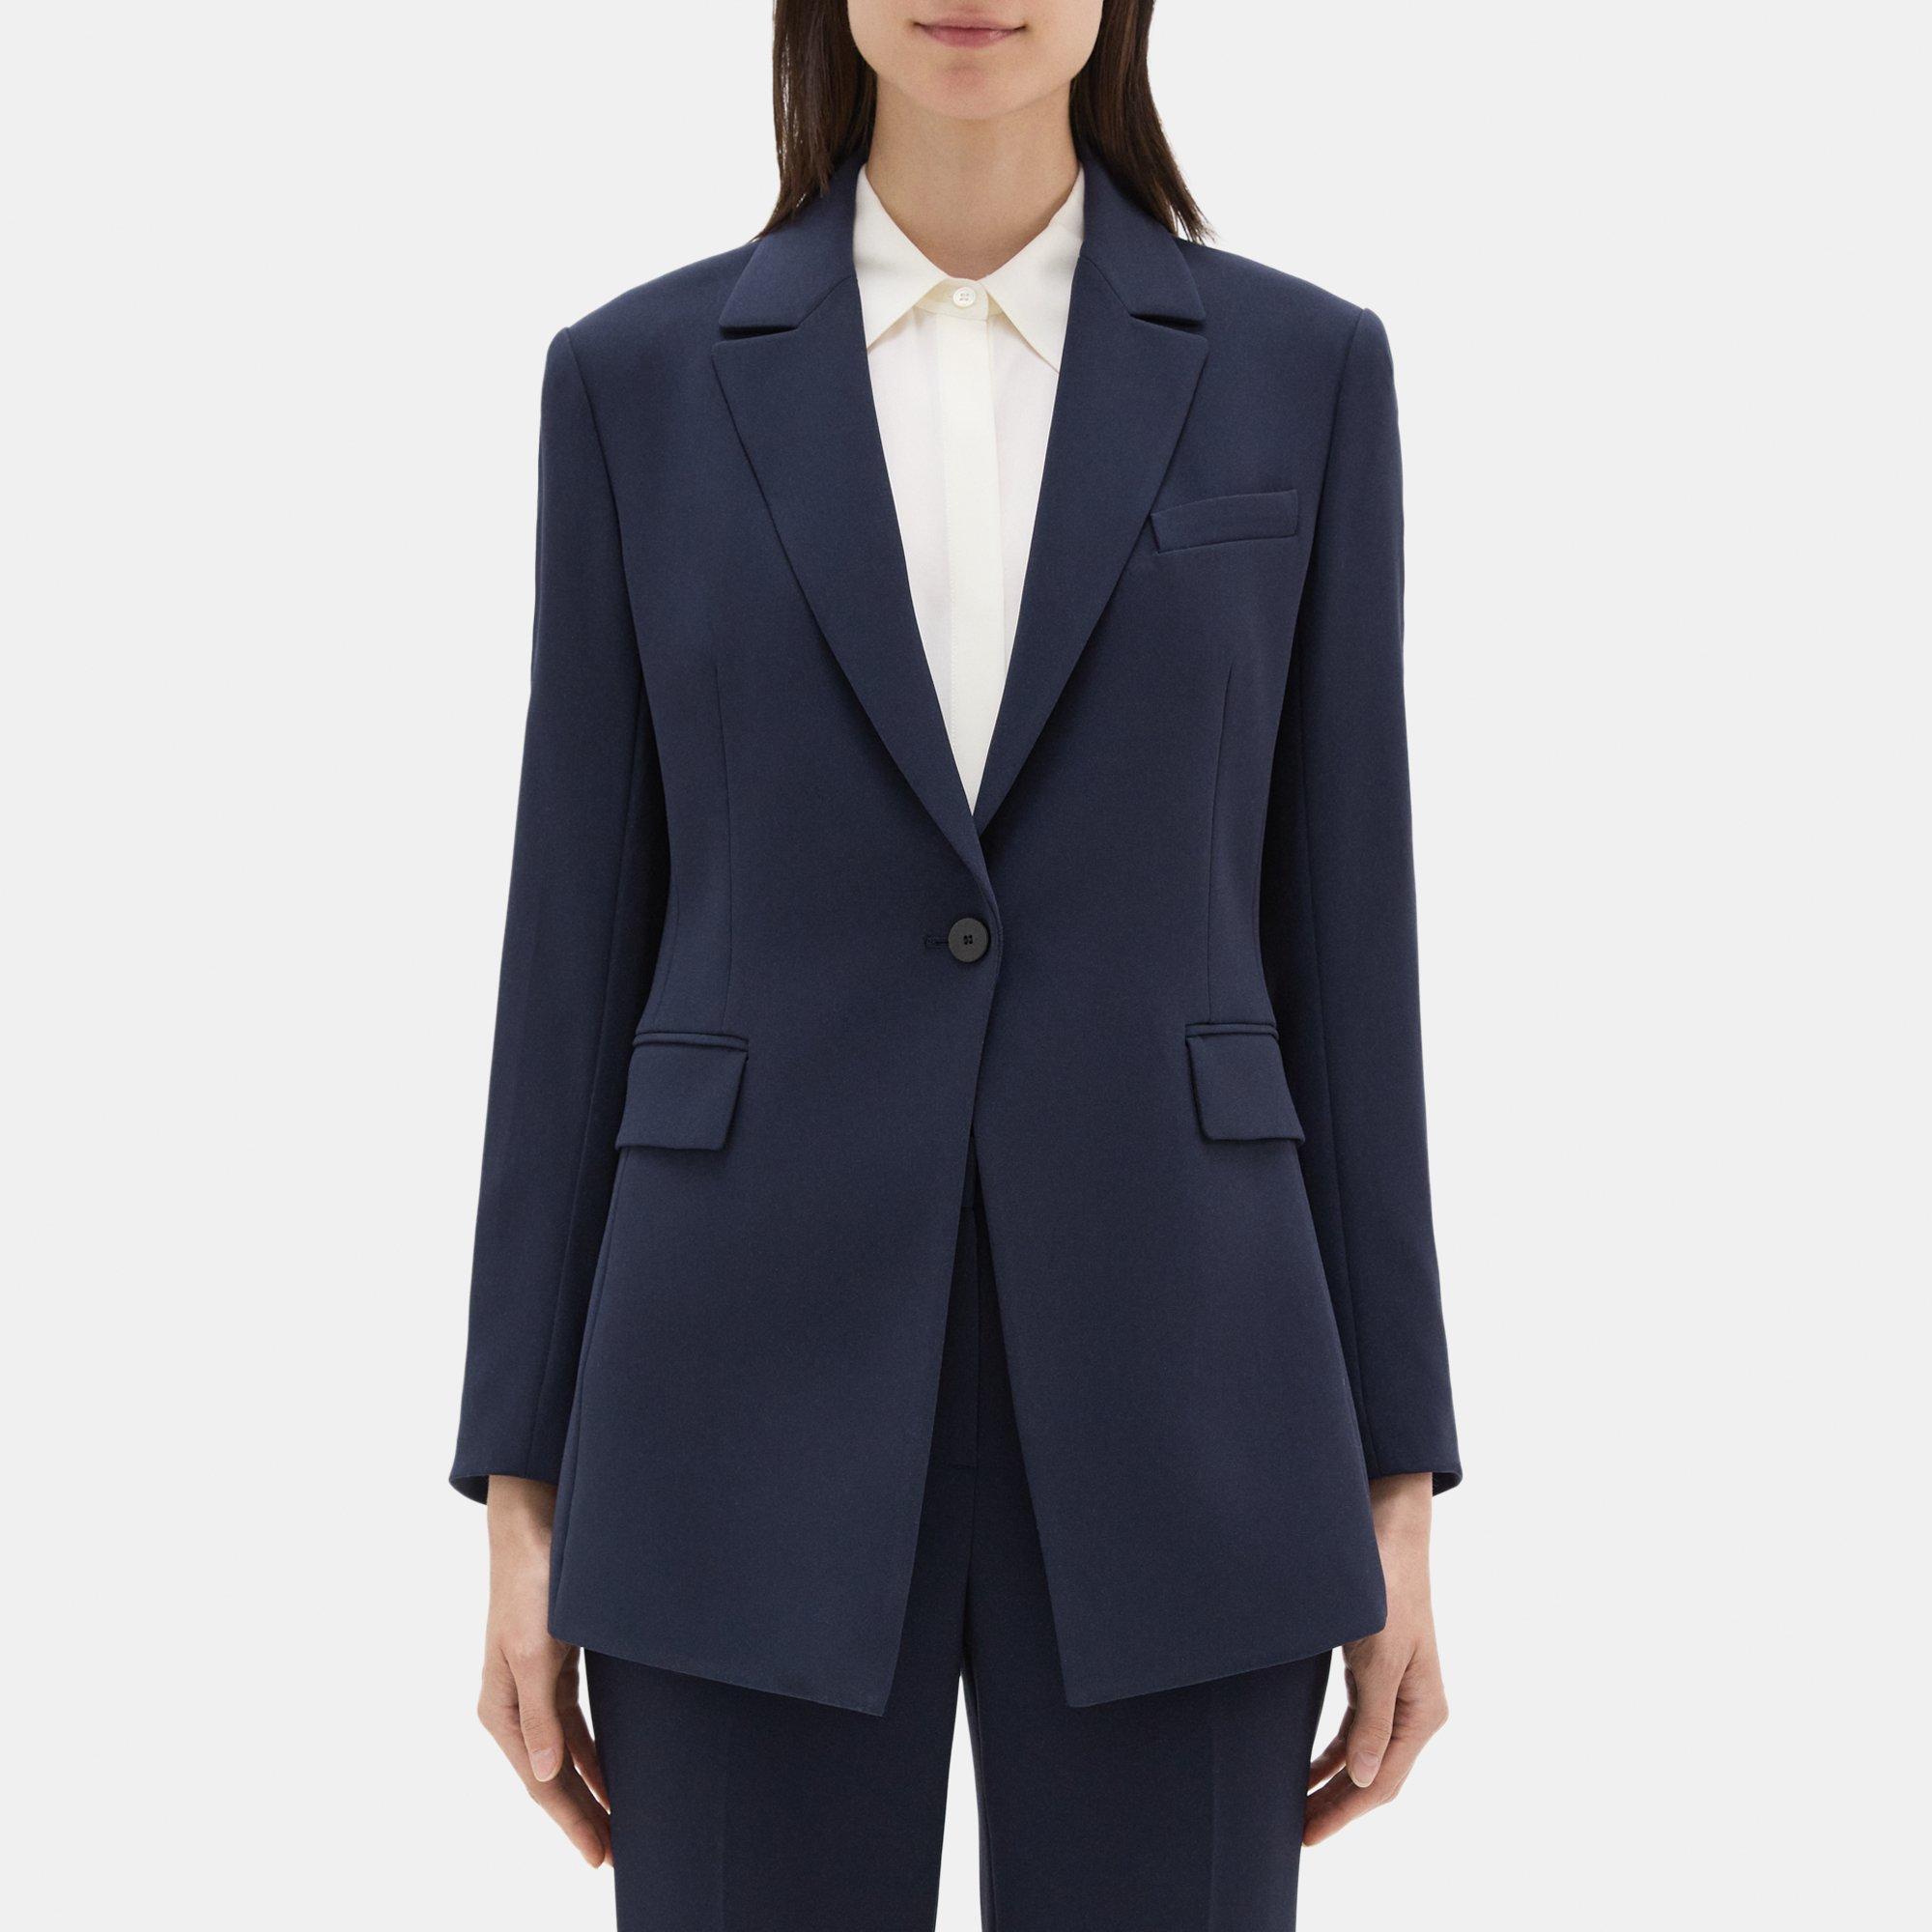 Women's Jackets and Vests | Theory Outlet